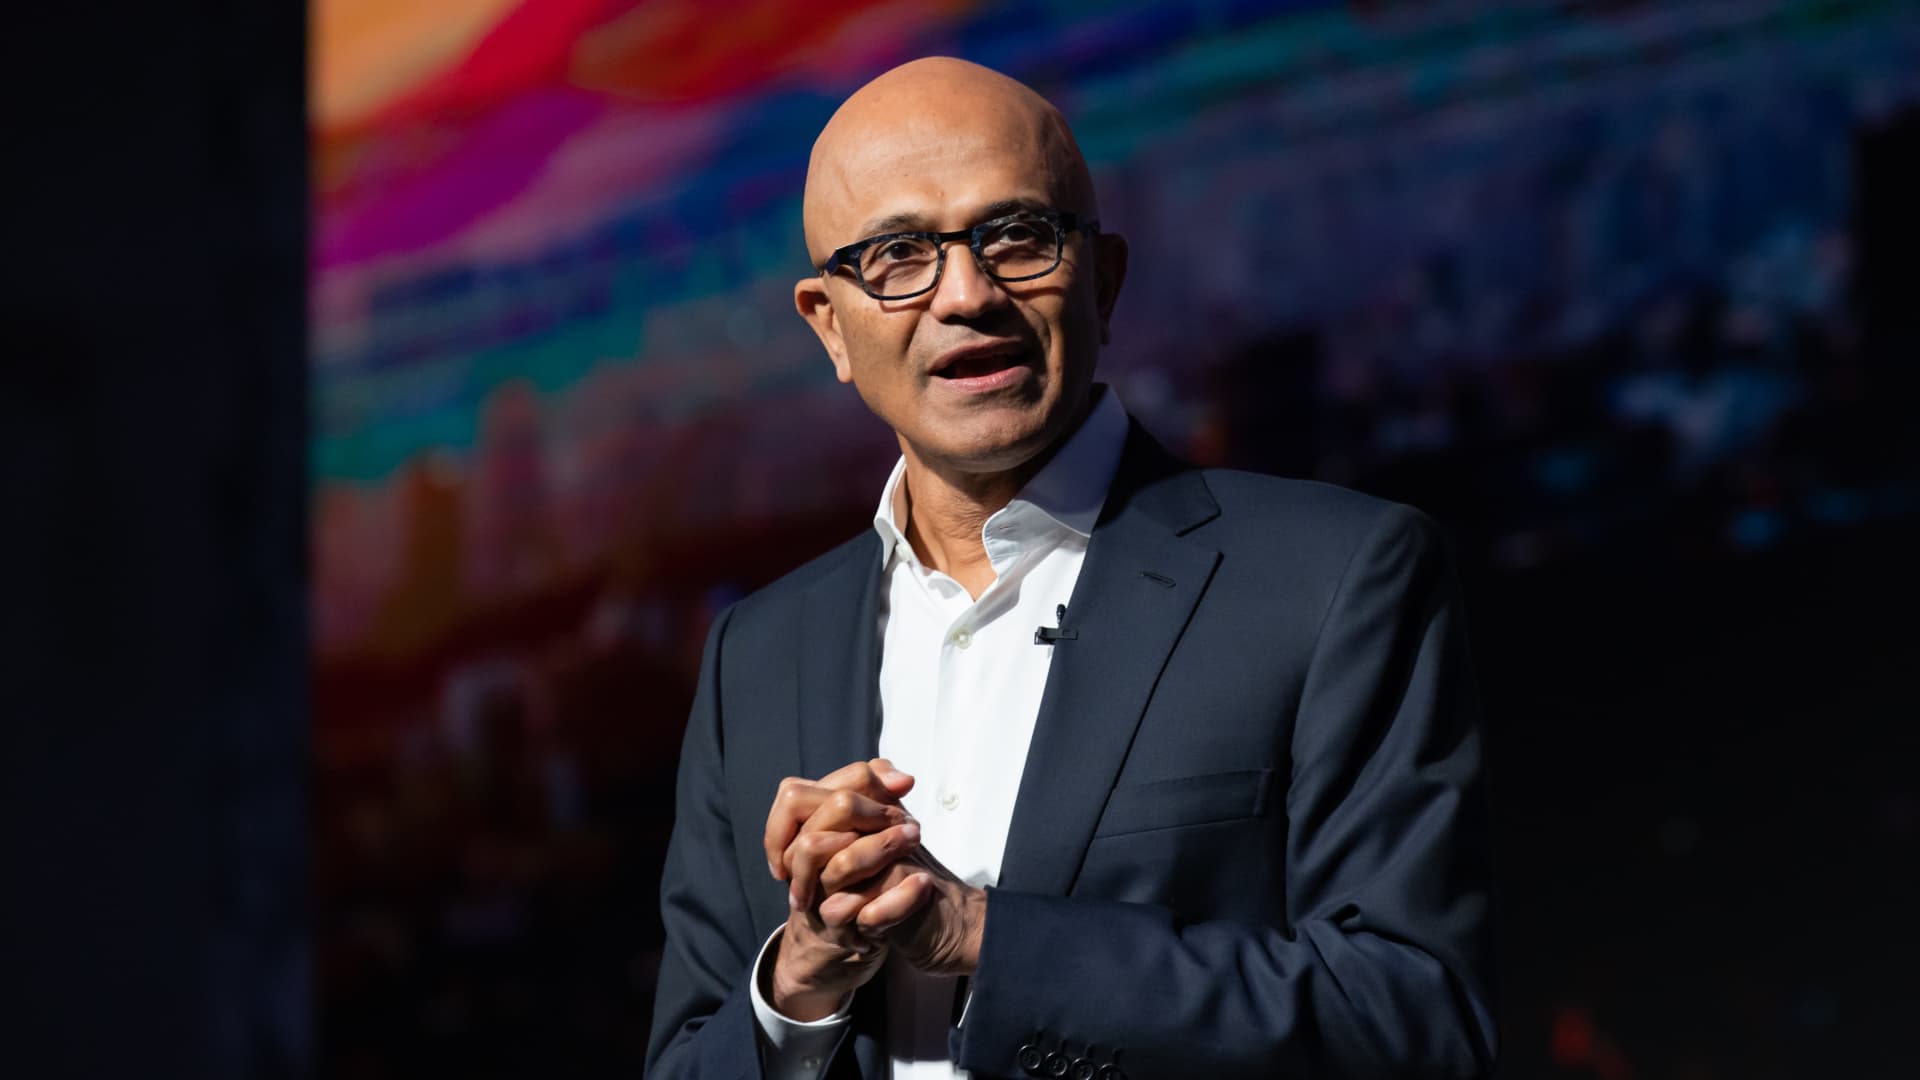 Microsoft reports earnings beat, says A.I. will drive revenue growth